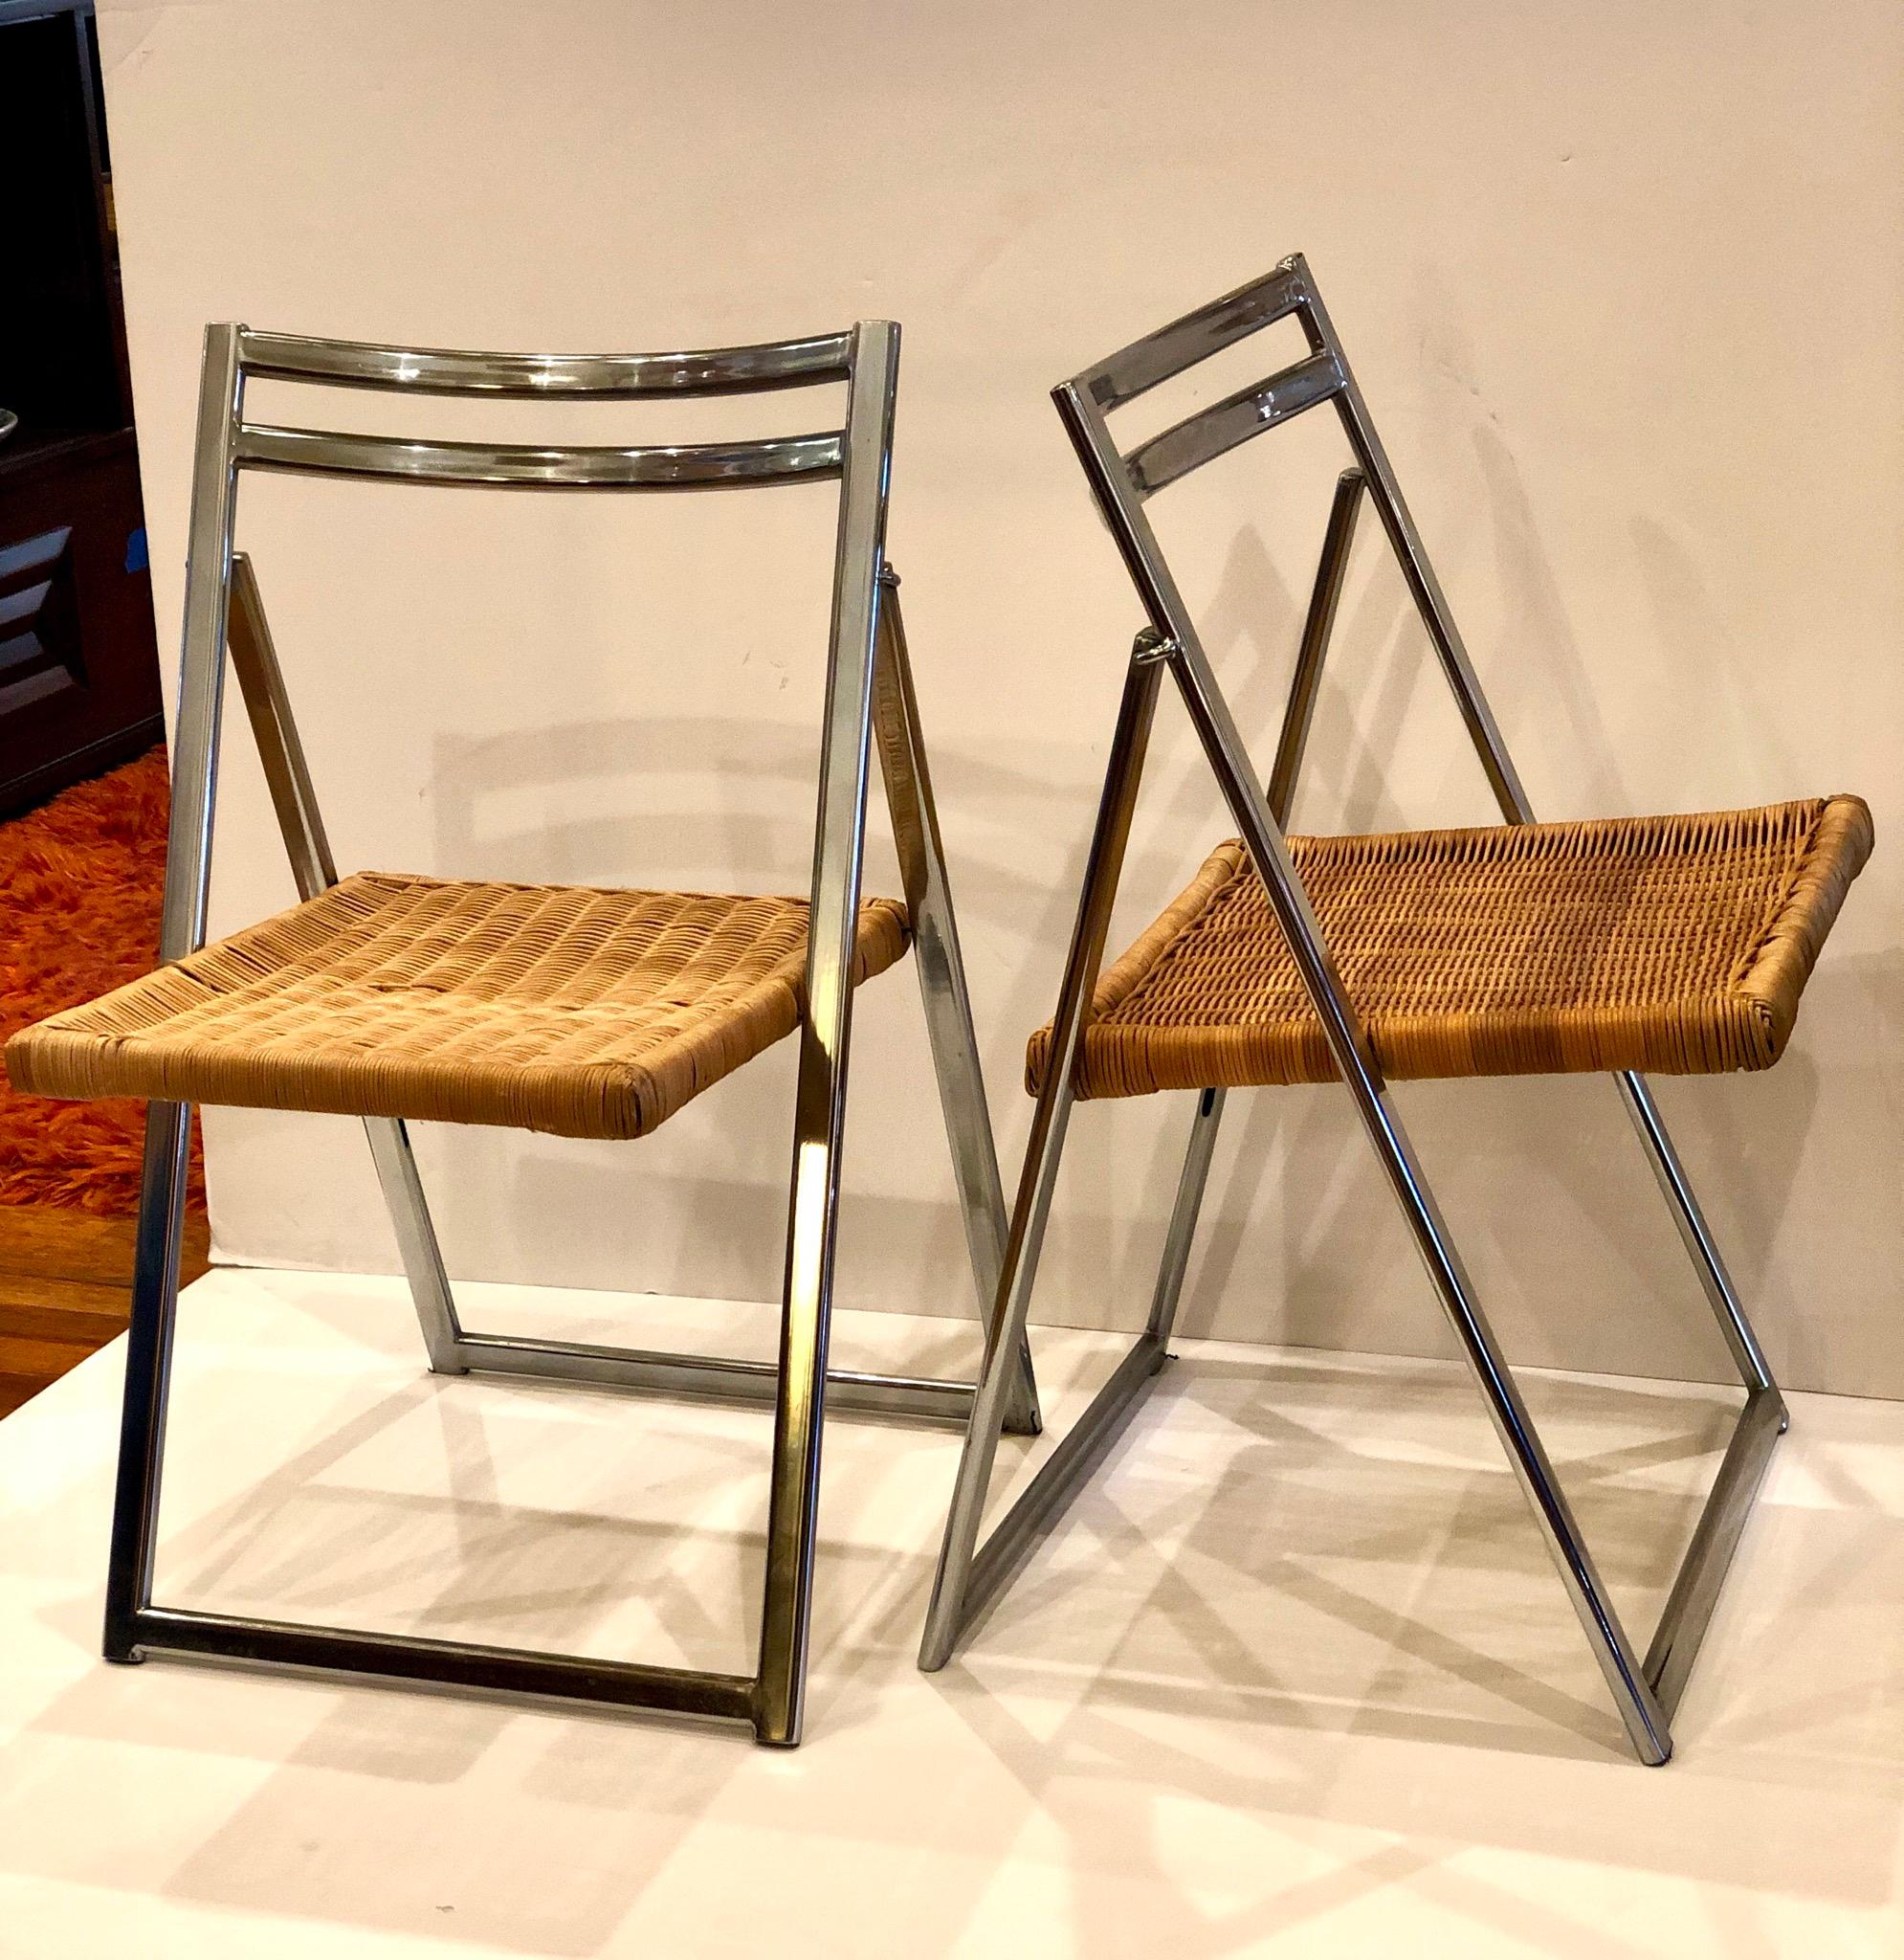 Nice pair of versatile on Italian folding chairs polished chrome steel frame with wicker seats, circa 1960s. The chairs have been polished and clean they show some wear due to age as shown, one of the seats has a couple of wicker strands broken as